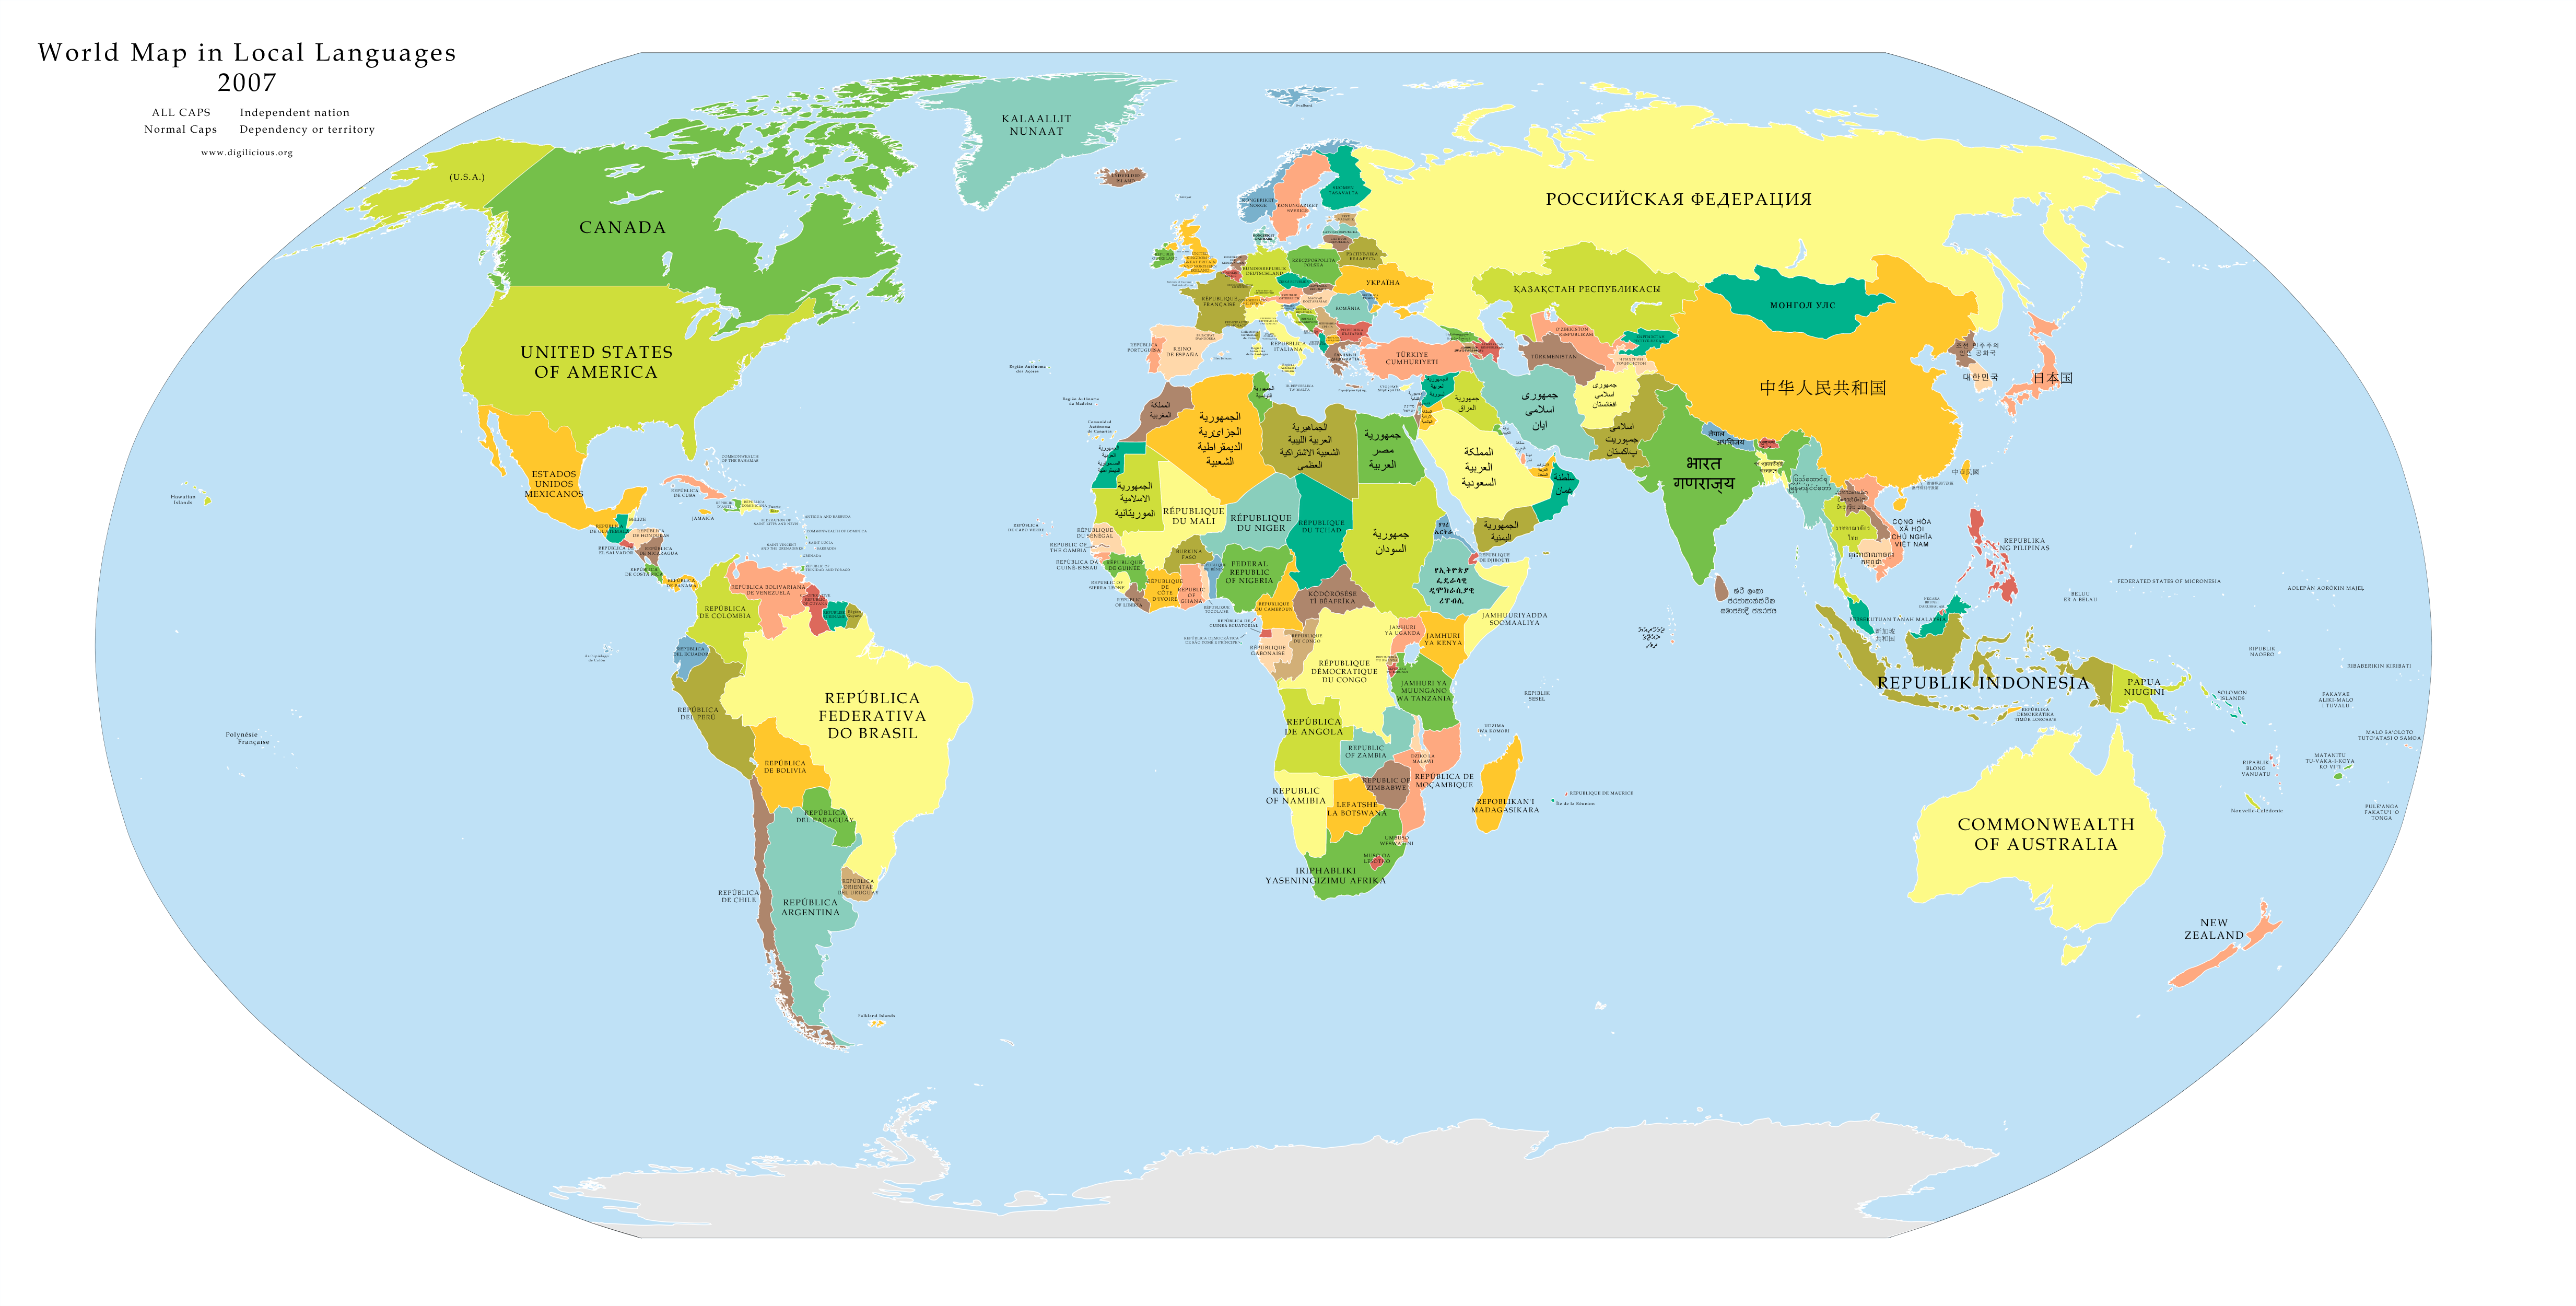 World Map in Local Languages